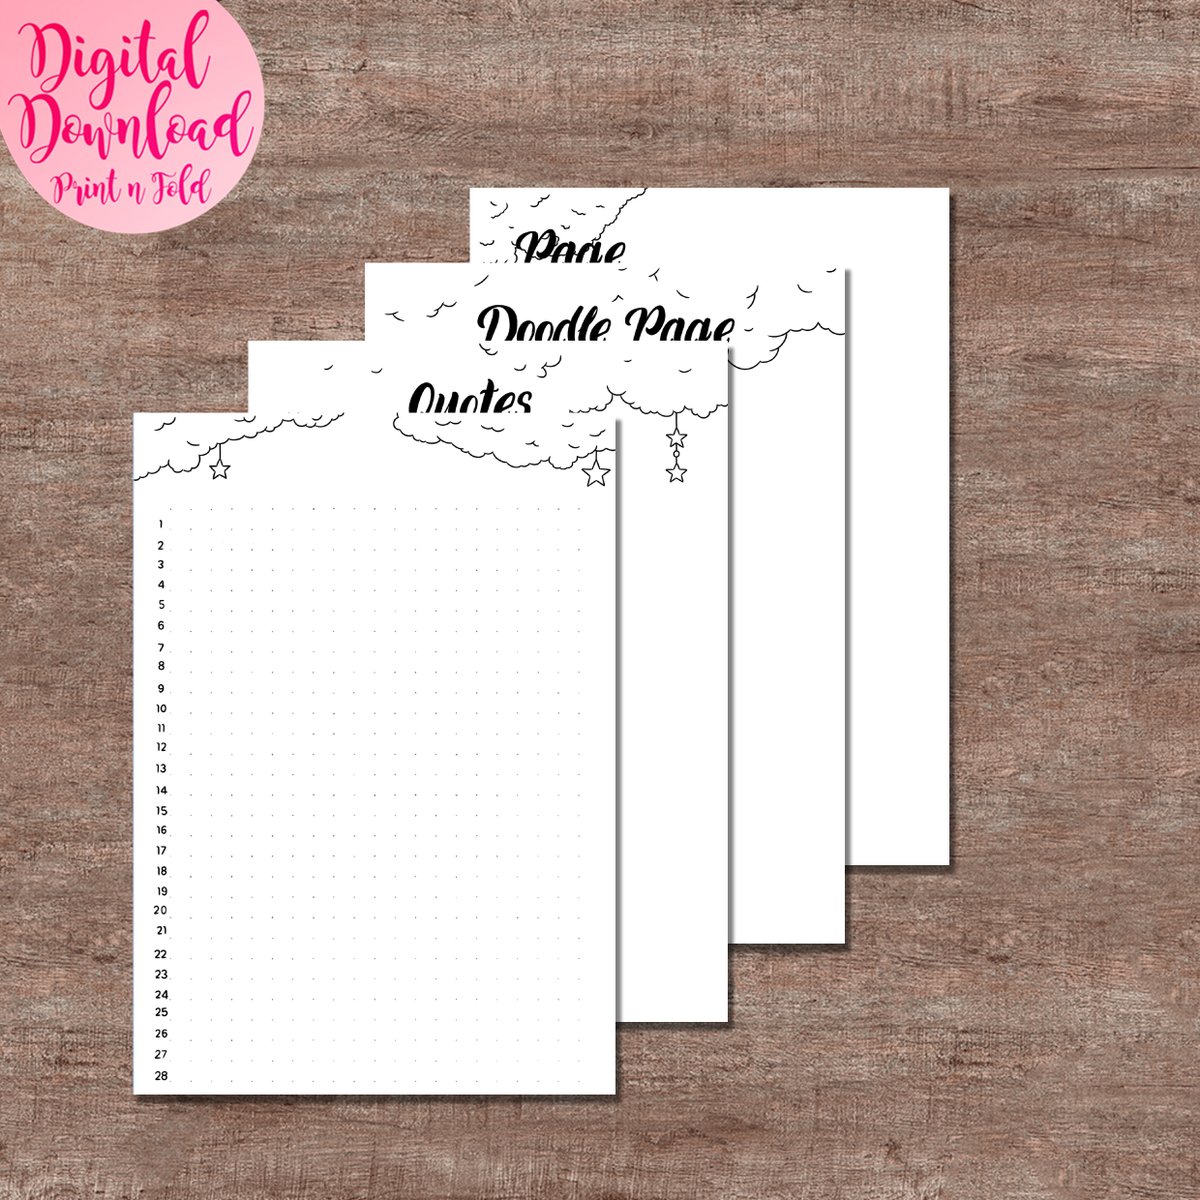 July is almost here

etsy.me/449QG1C 

#monthly #planner #pages #clouds #illustrated #printable #journaling #tracker #moodtracker #spendingtracker #savingstracker #adultcolourin